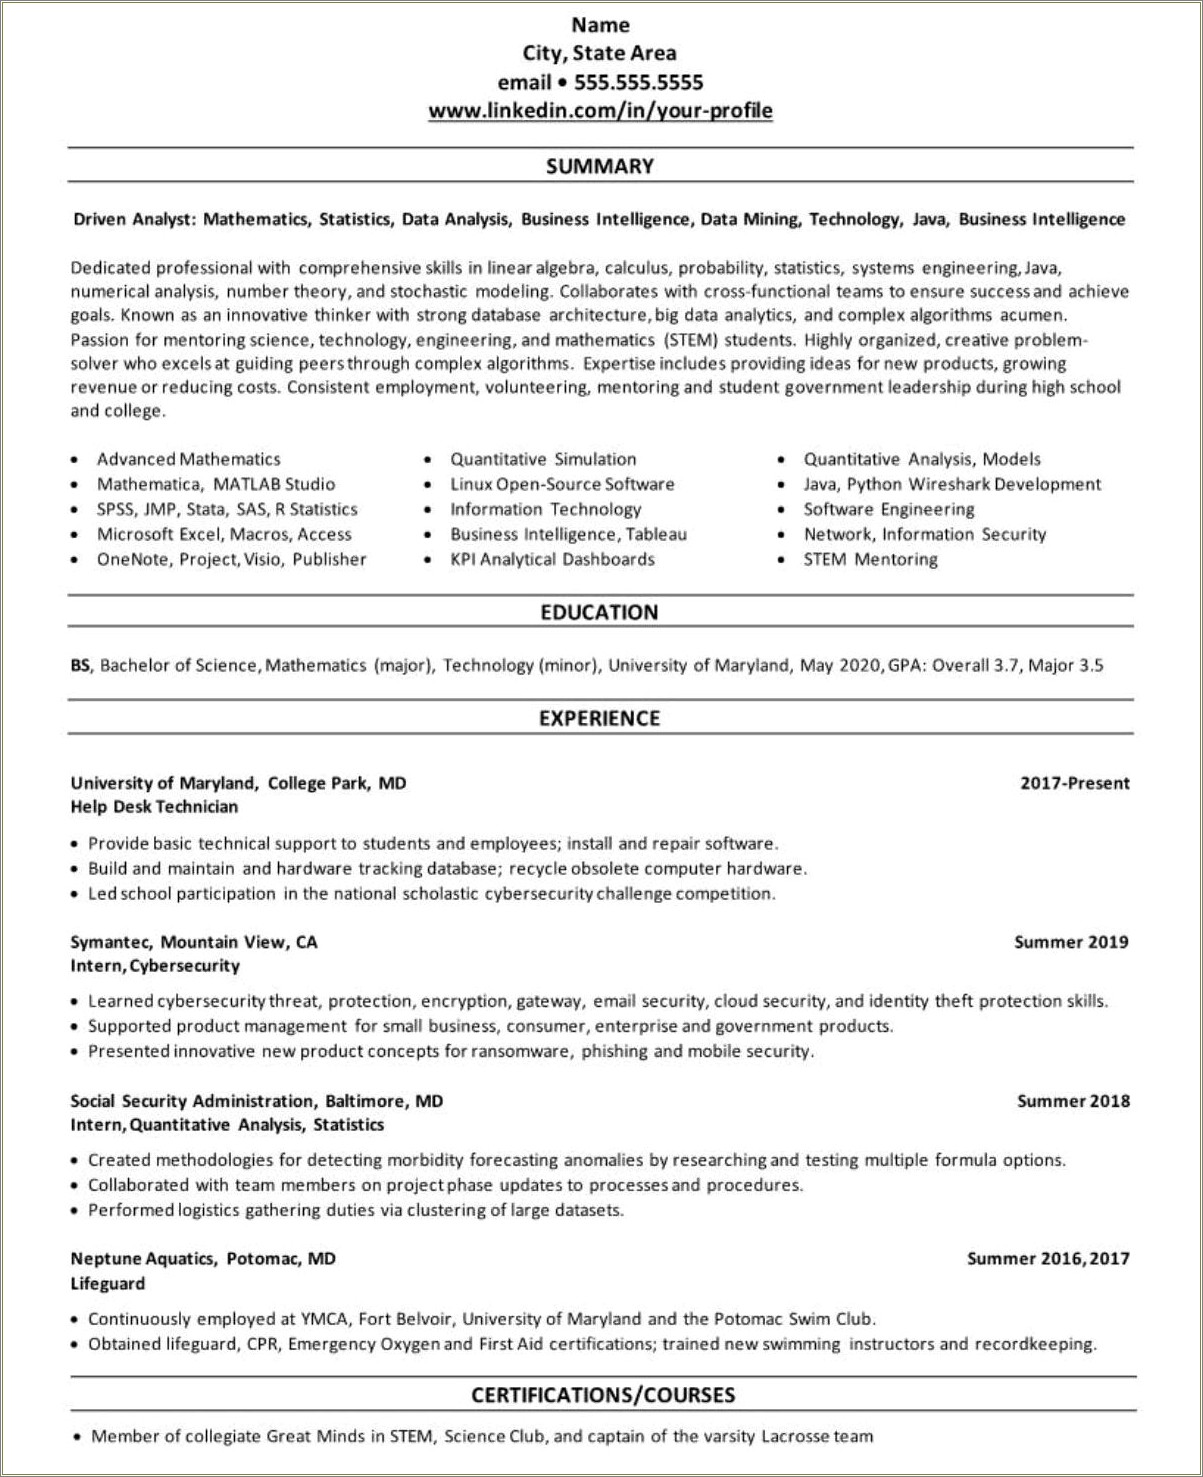 Example Resume Good With Technology Reddit